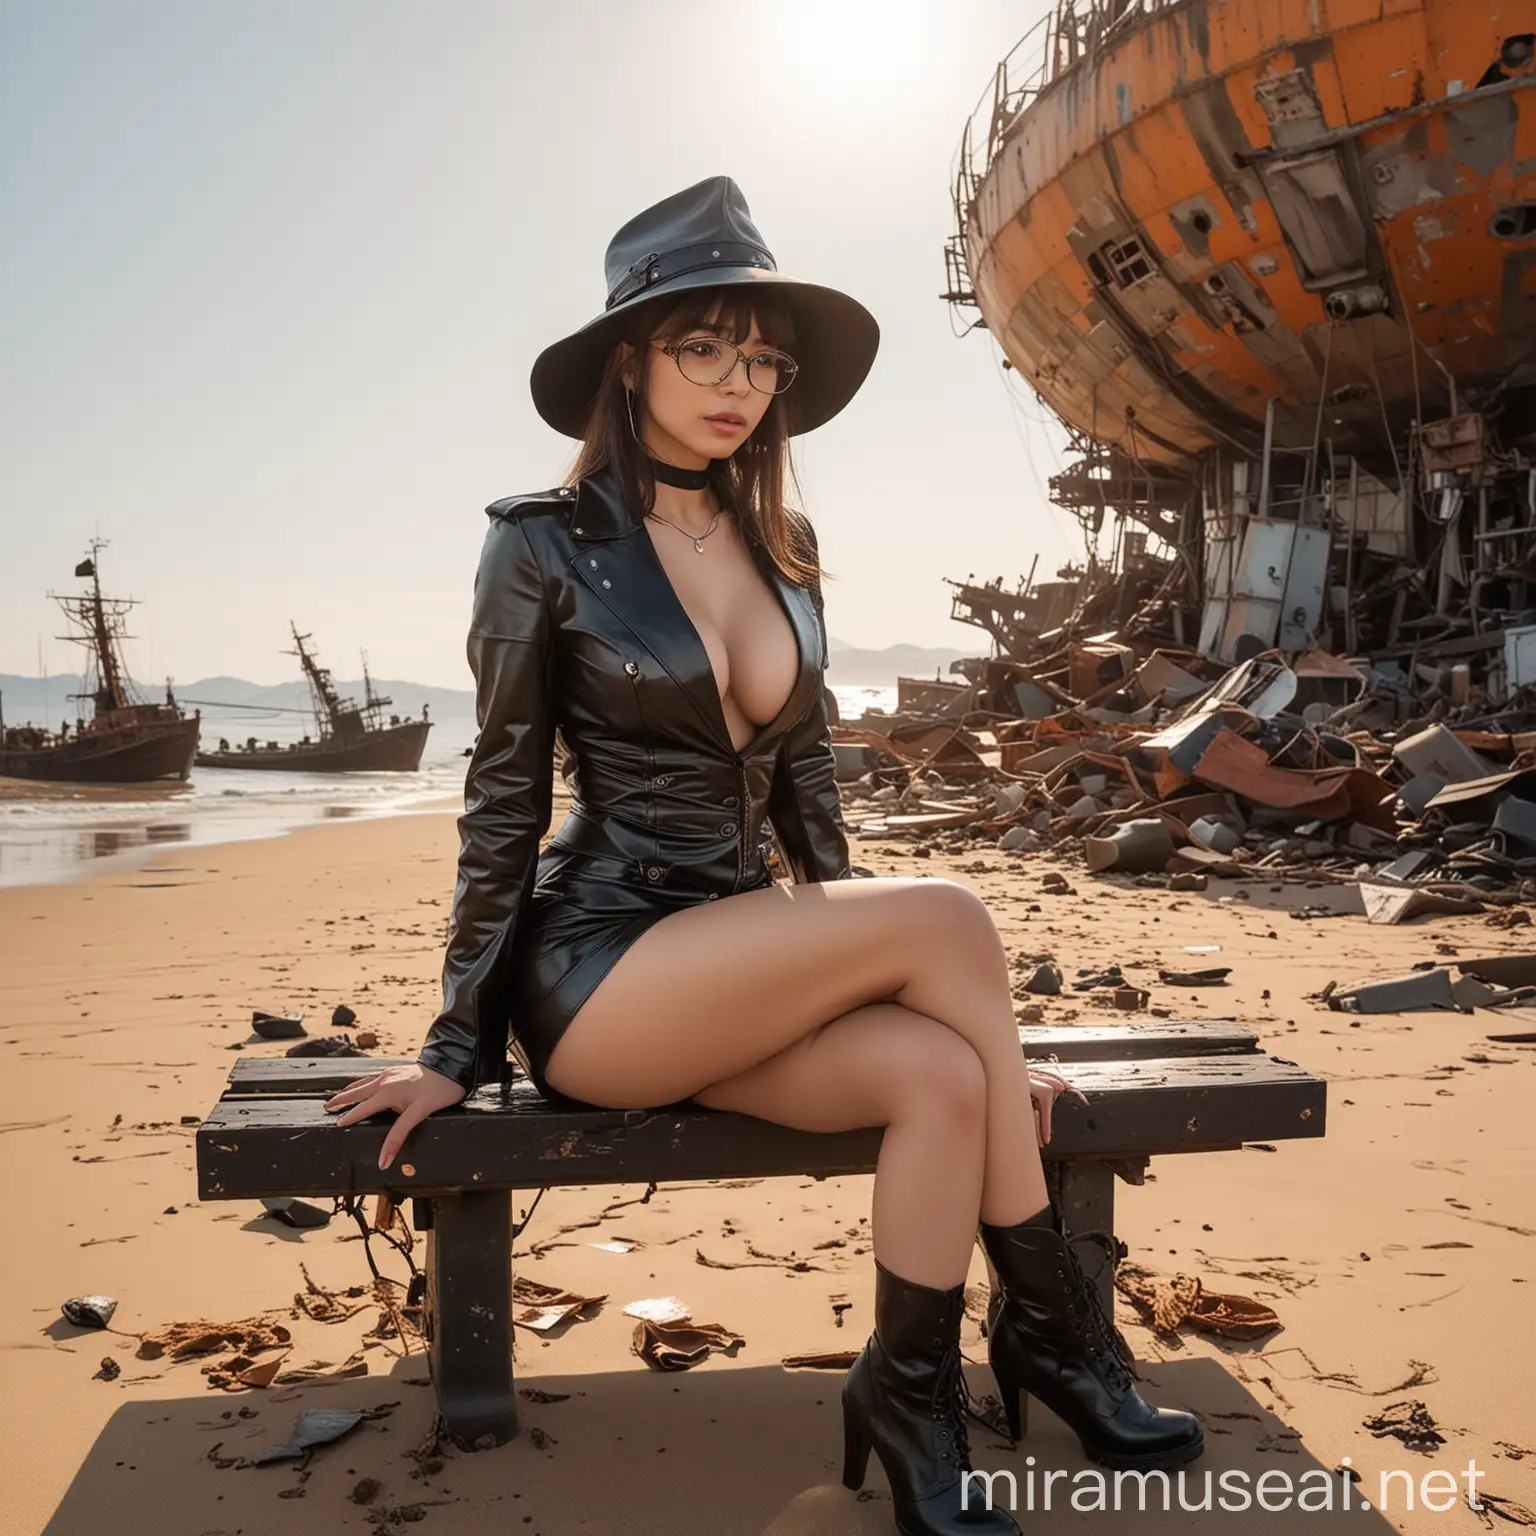 Alex, now a singular fusion of Mia Khalifa and Hitomi Tanaka, found herself in a surreal setting. The desolate beach, covered in metallic debris and abandoned ships, was the beginning of your journey in a world that mixed reality with elements of the Fallout games and the exuberant 80s.
  ((Her skin had a tan tone)), Her eyes, almond-shaped and deep, Alex lifted herself off the ground after a few attempts, due to the large breasts she got from Hitome Tanaka
Looking at the backpack he found next to him, Alex discovered a paper with his name on it: Mia Alex Tanaka, 21 years old, and her clothes were a latex corpet, a latex mini skirt, latex thigh-high boots, long latex gloves, an open latex jacket.
Determined to unravel the mysteries of this retro-futuristic world, Alex adjusted her round glasses and steampunk-style latex witch hat and hoop earrings, preparing to explore beyond the beach. sitting cross-legged on a bench in a sexy way
As the sun set over the horizon, casting orange tones over the desolate landscape, showing the fusion of Mia Khalifa and Hitomi Tanaka